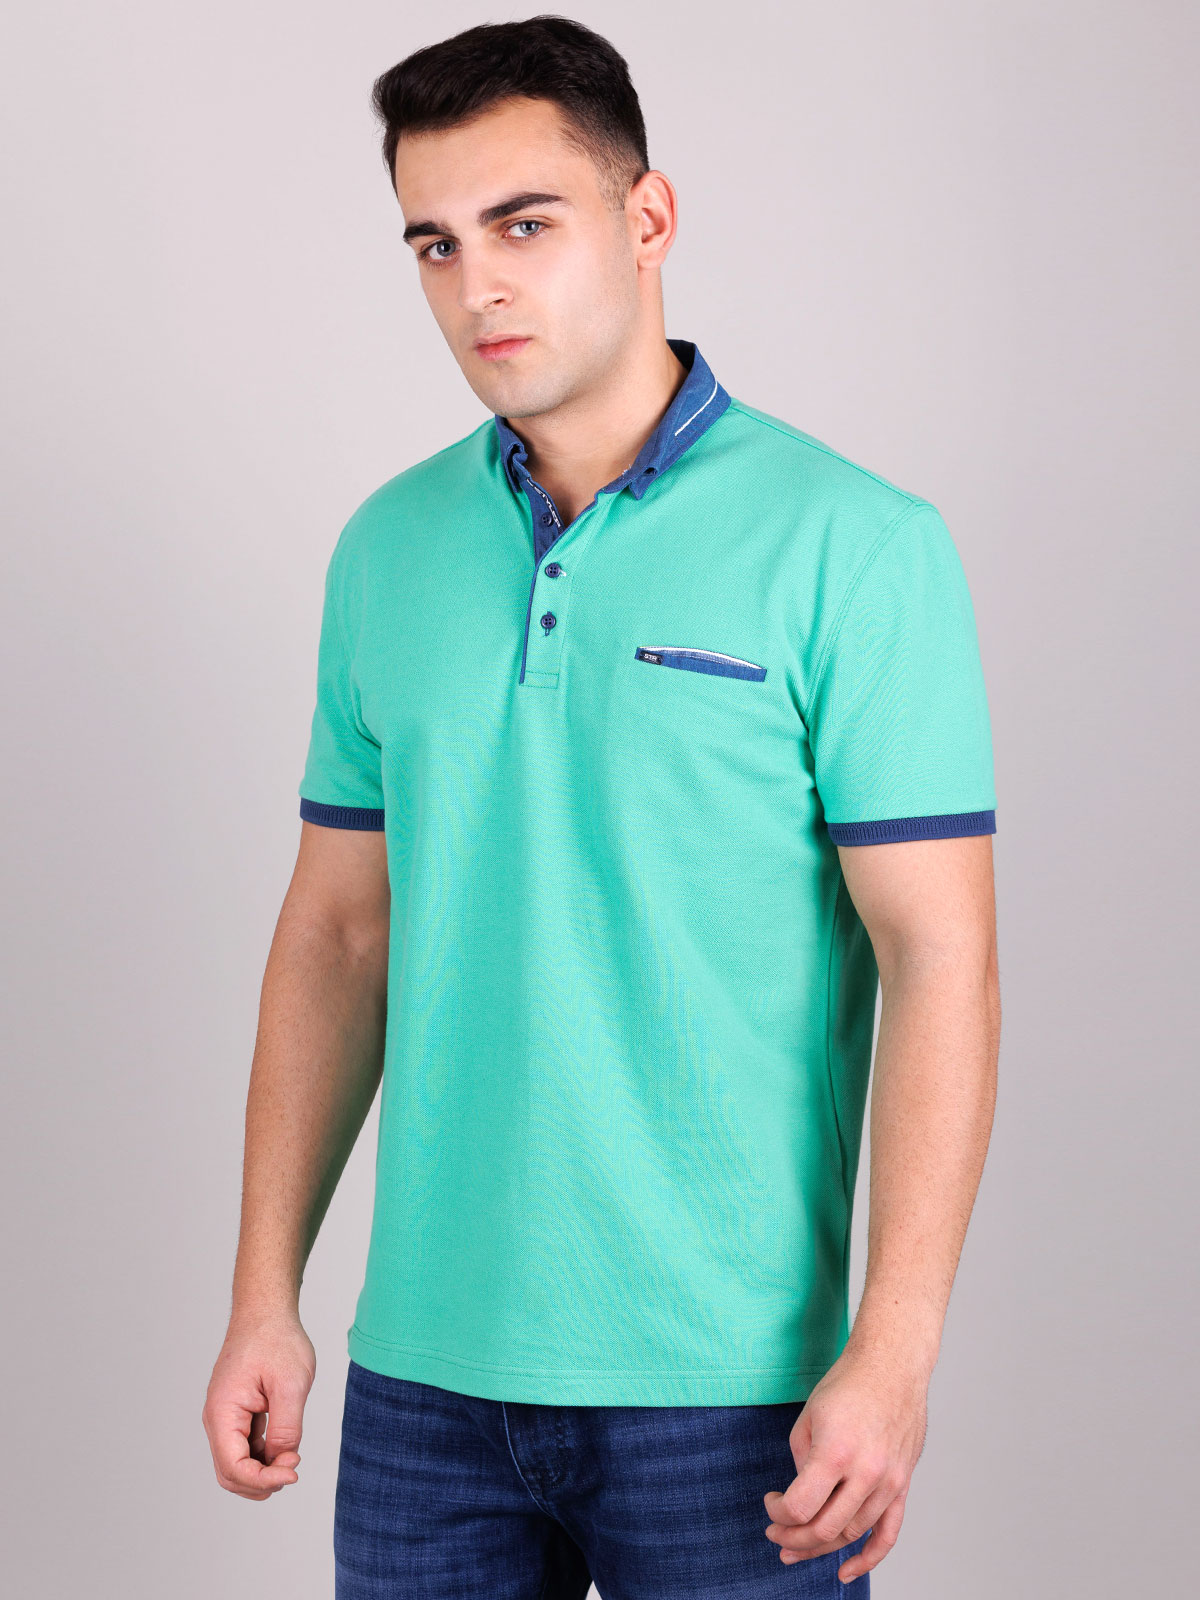 Tshirt in green with a denim collar - 93414 € 30.93 img3